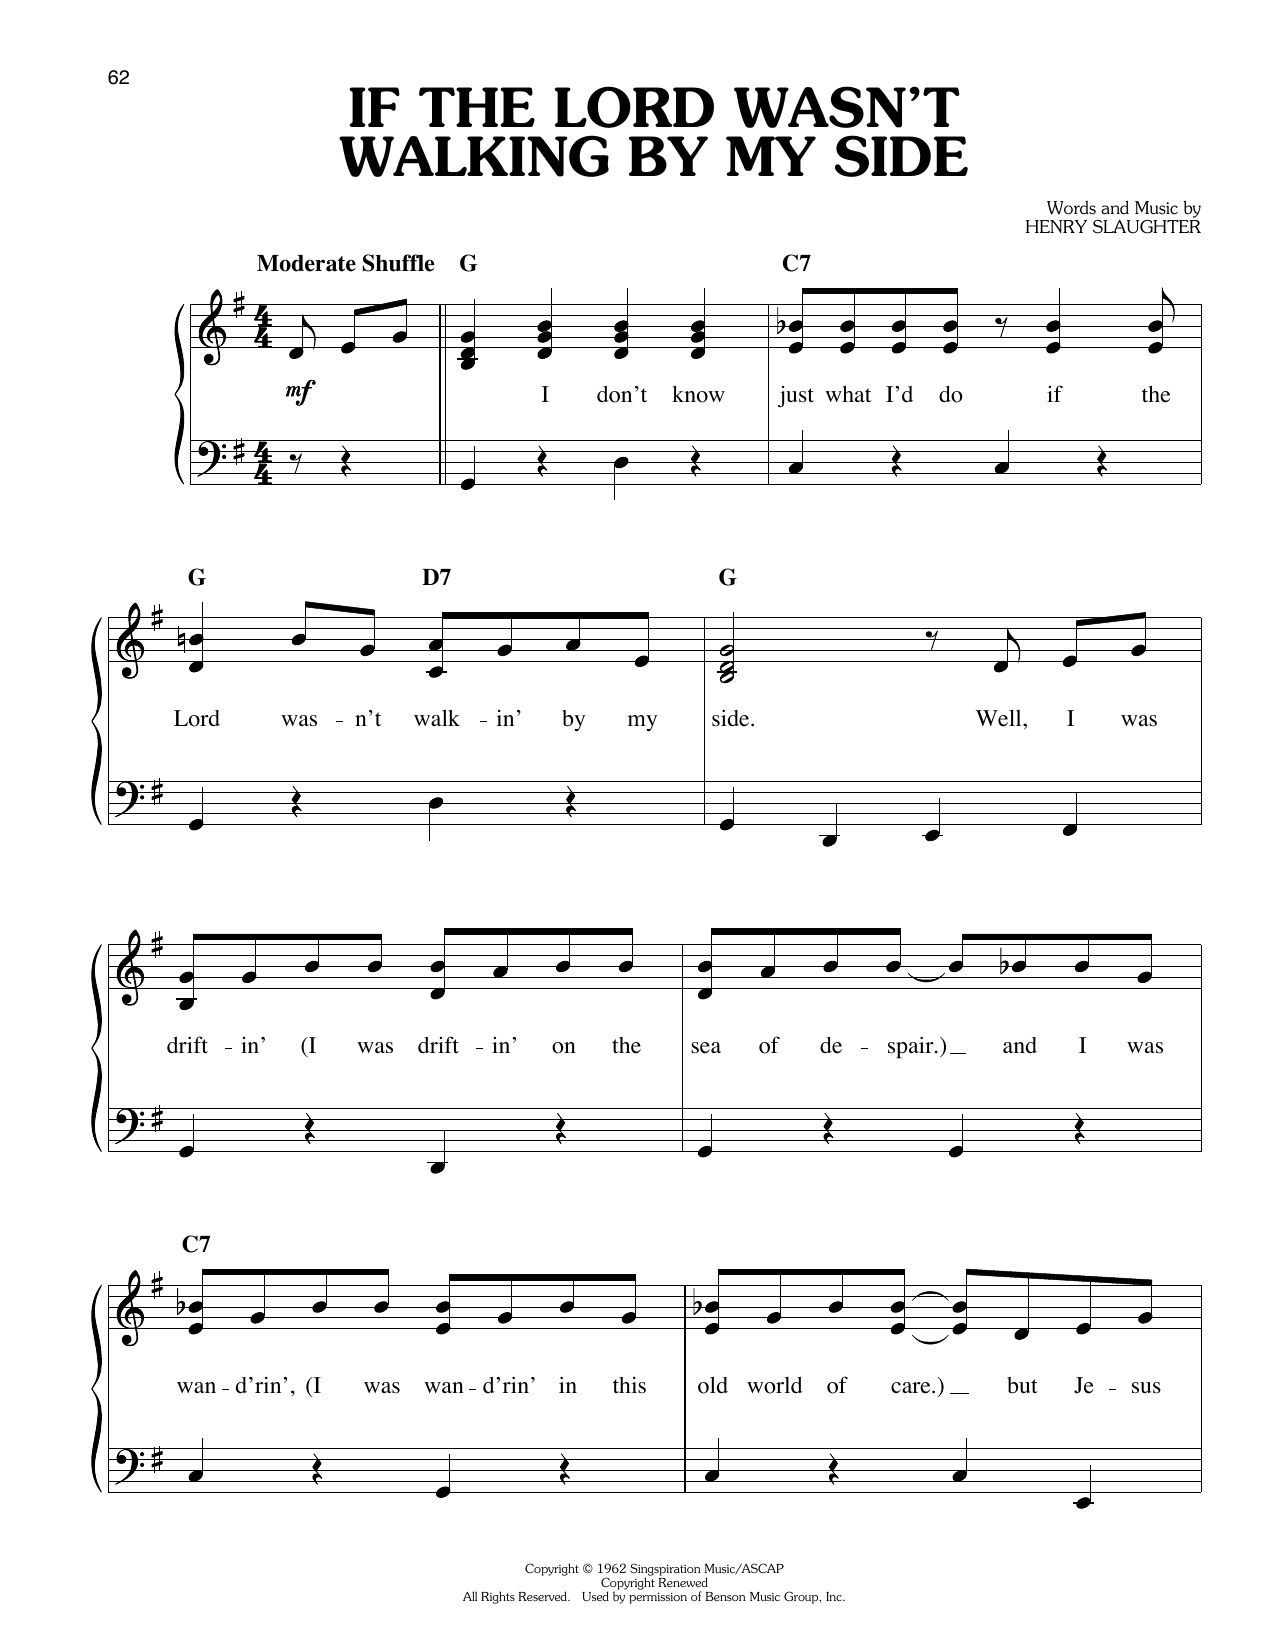 Download Elvis Presley If The Lord Wasn't Walking By My Side Sheet Music